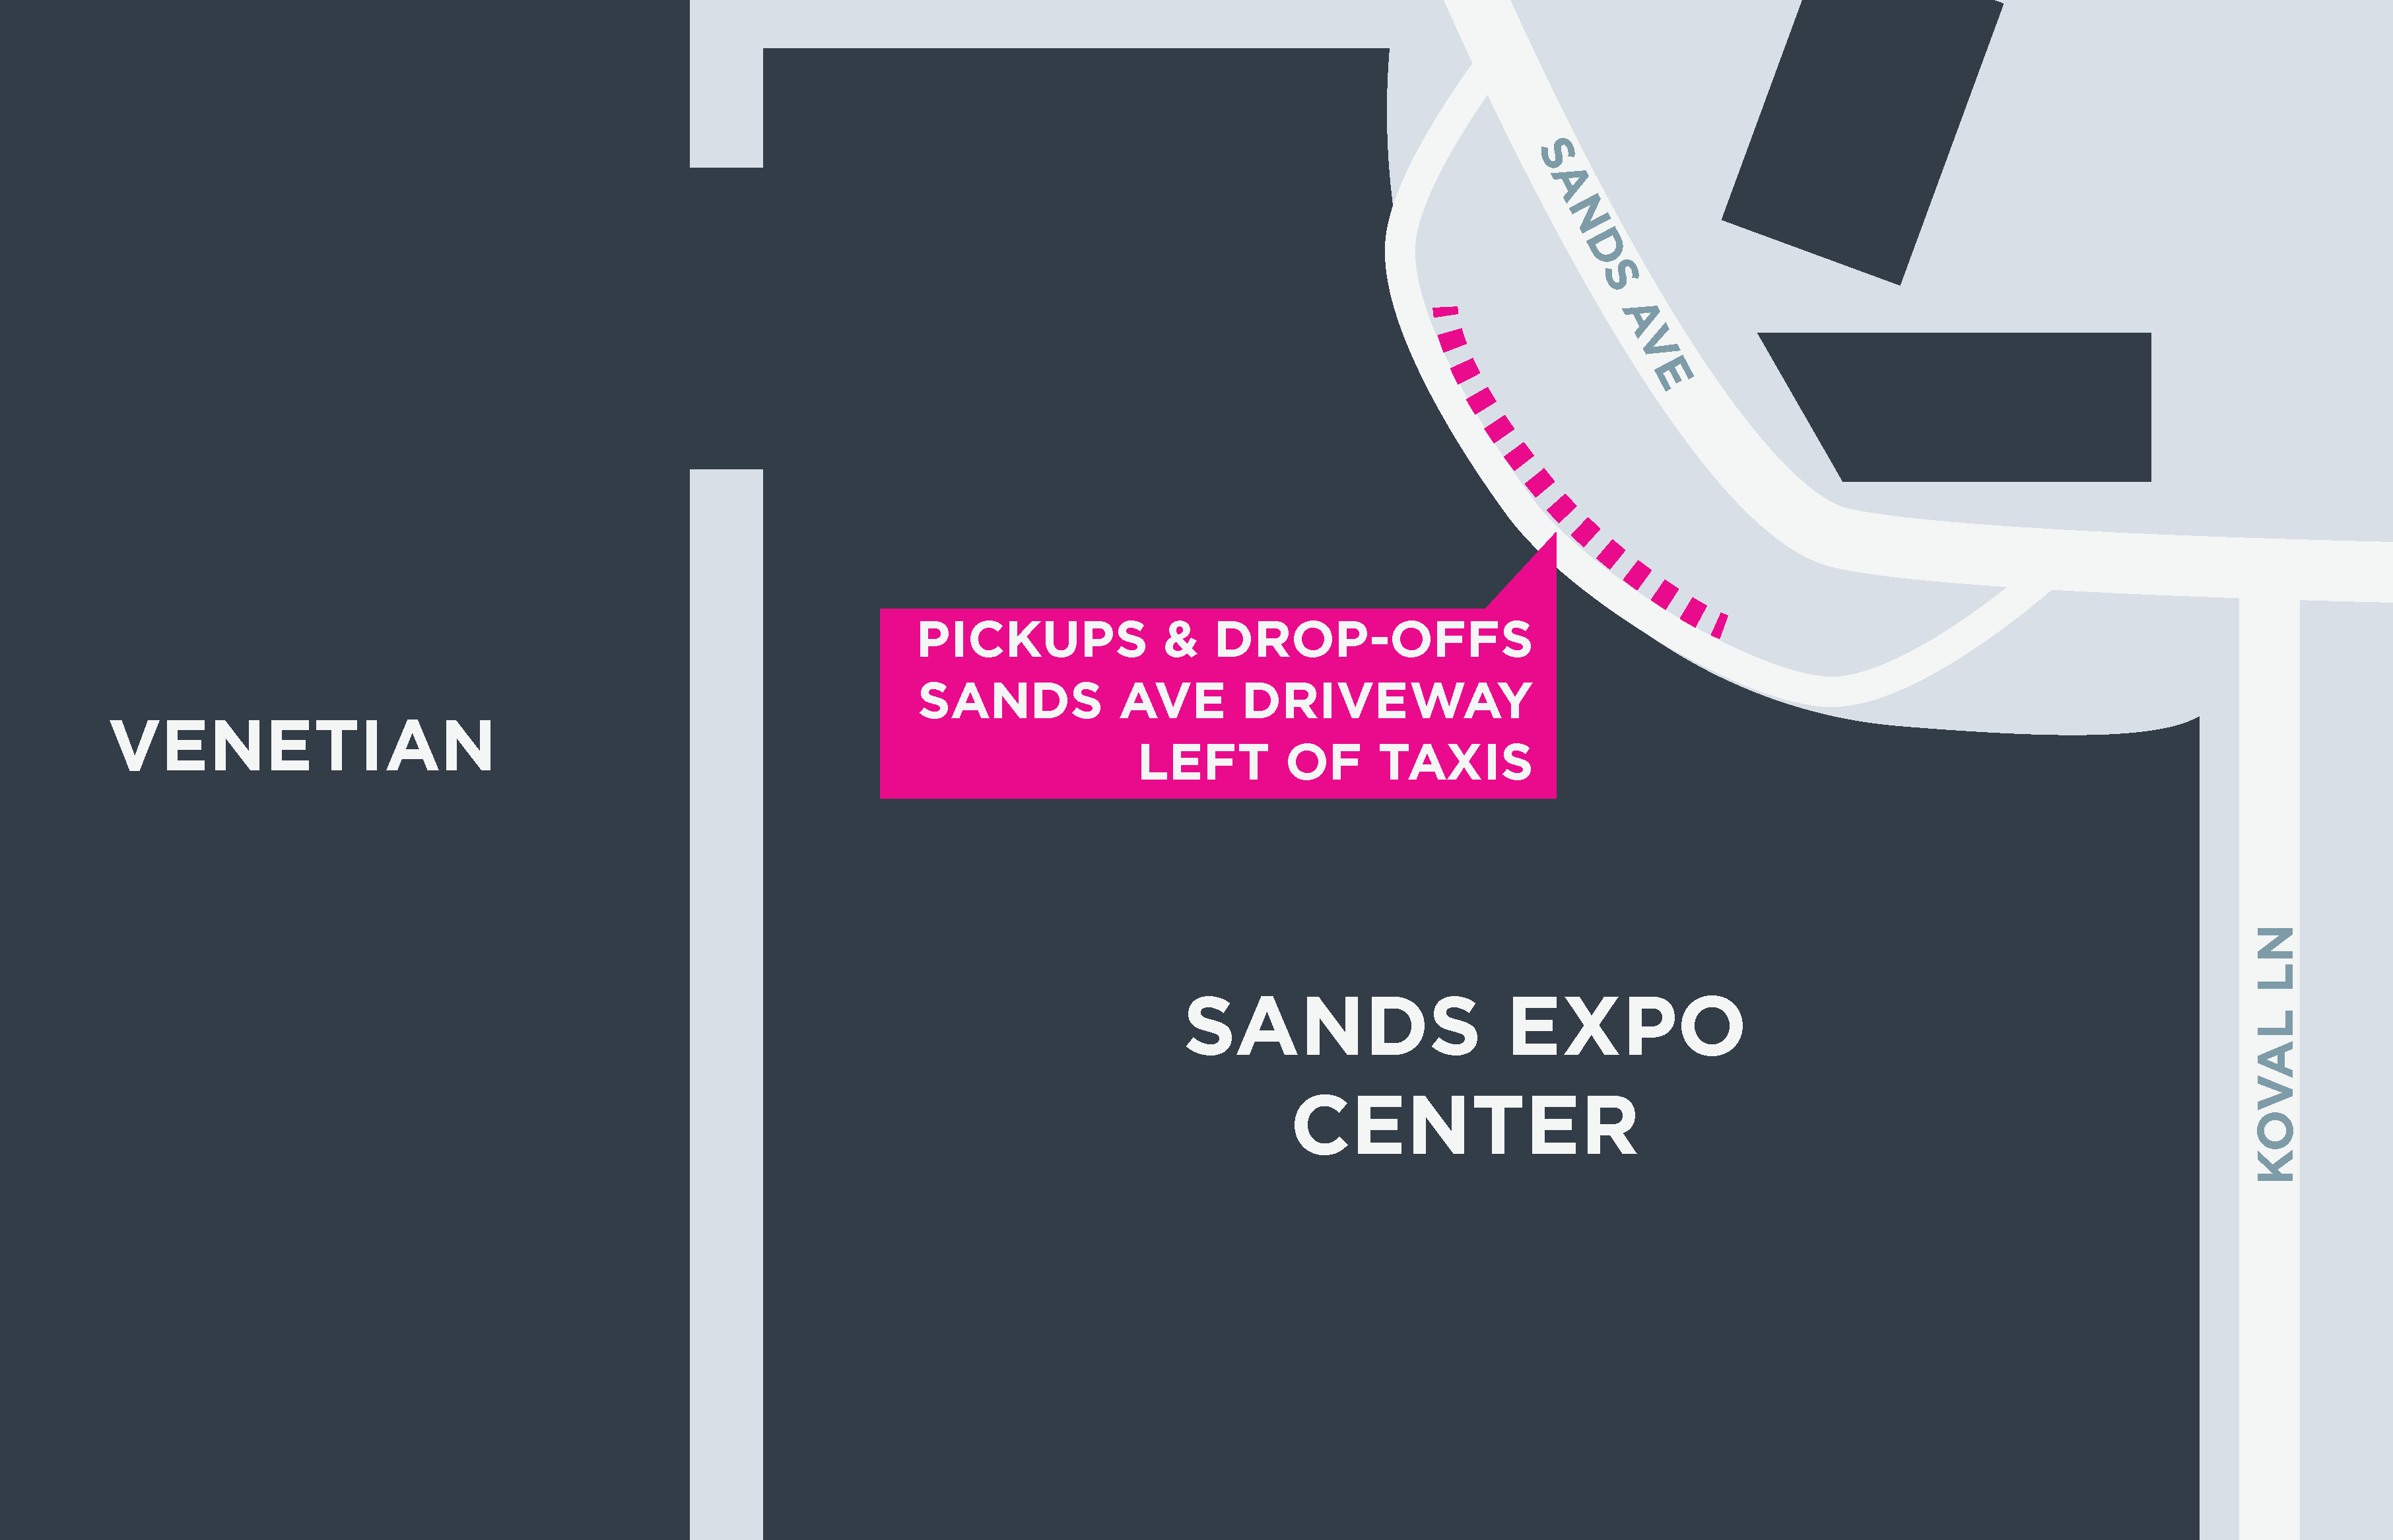 This image shows a map of the Sands Expo, including pickup and dropoff areas.